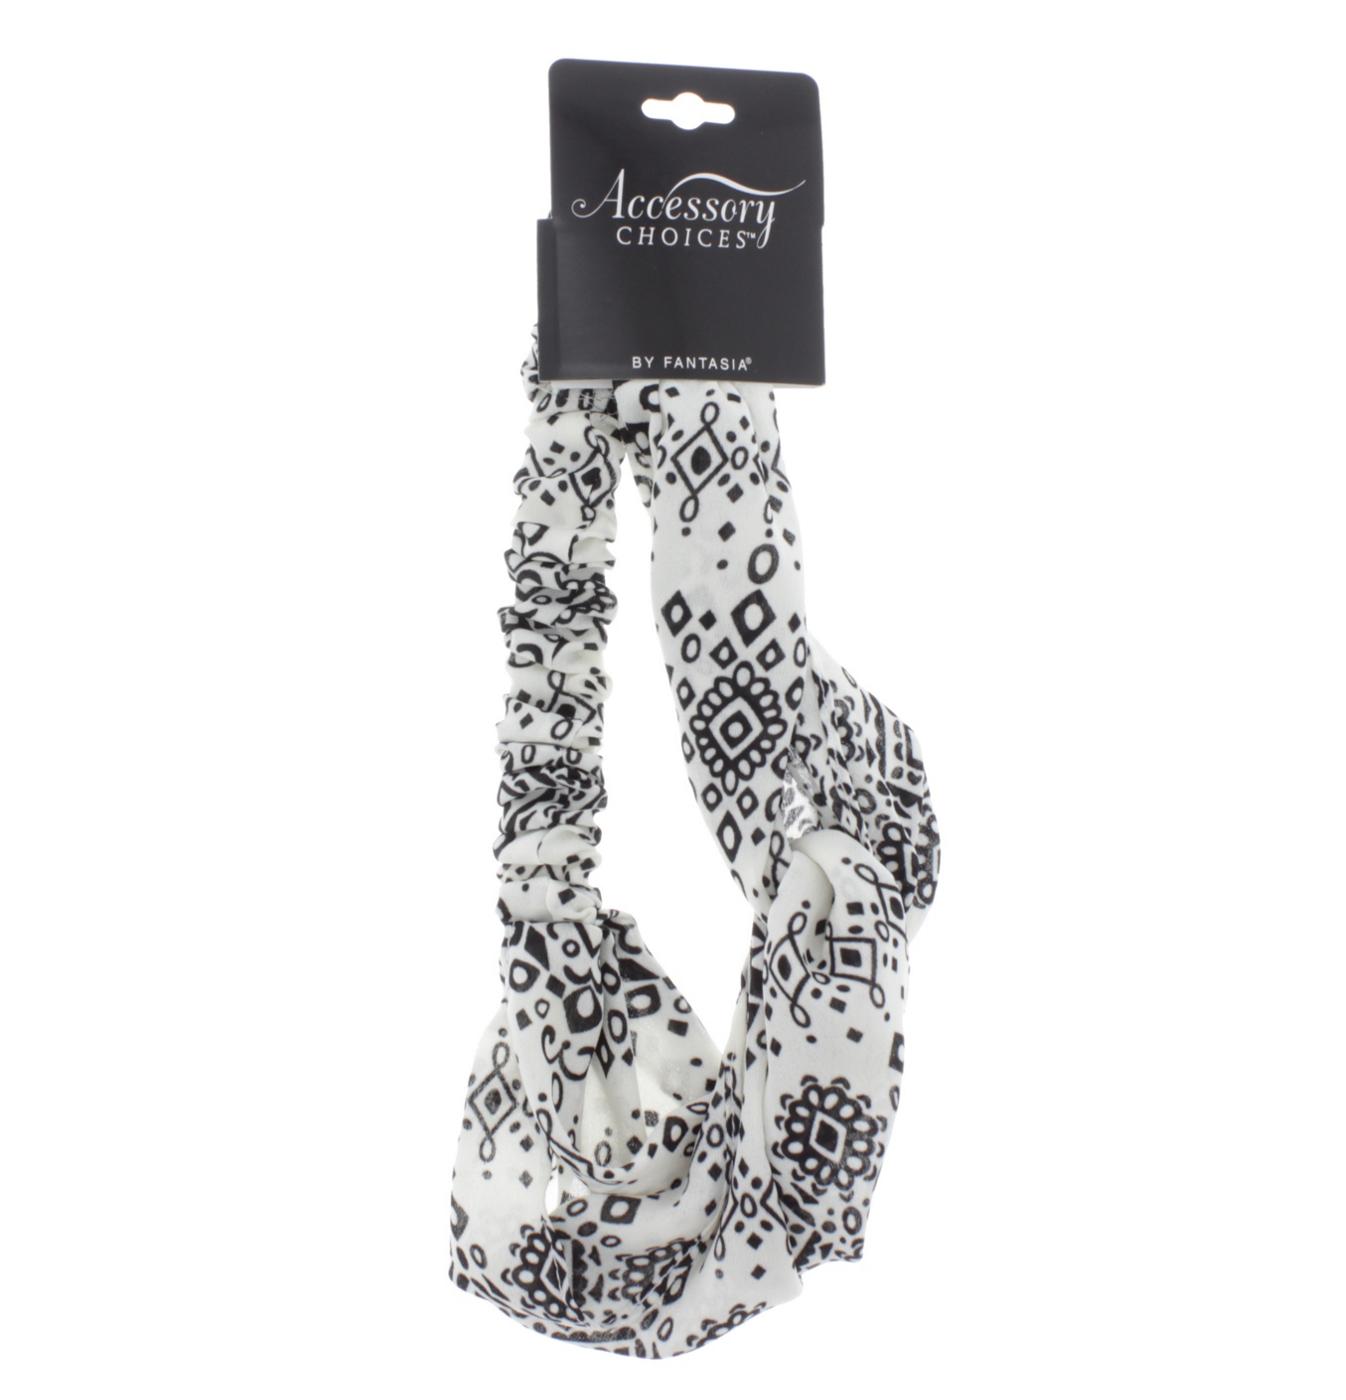 Accessory Choices Black & White Floral Twist Front Headwrap, Assorted Colors; image 2 of 2